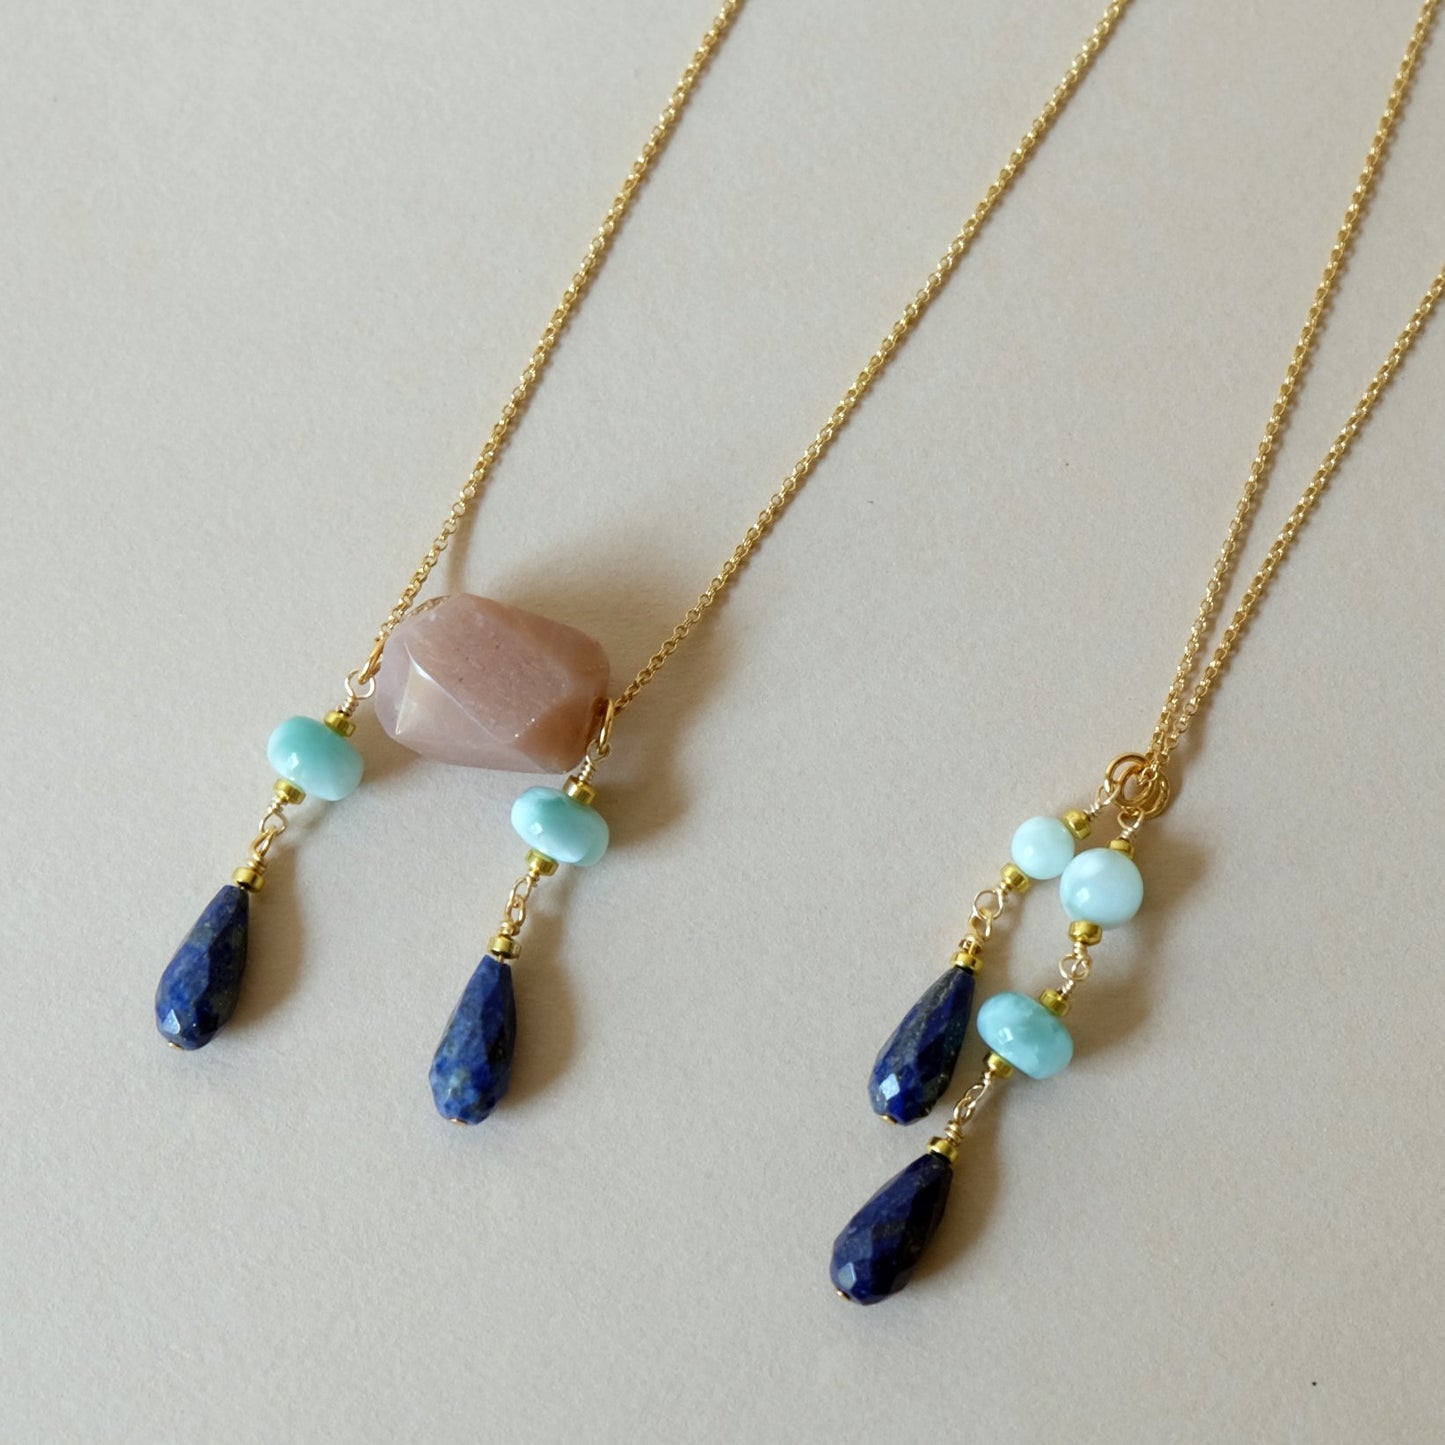 Necklace with Lapis Lazuli and Moonstone Charms